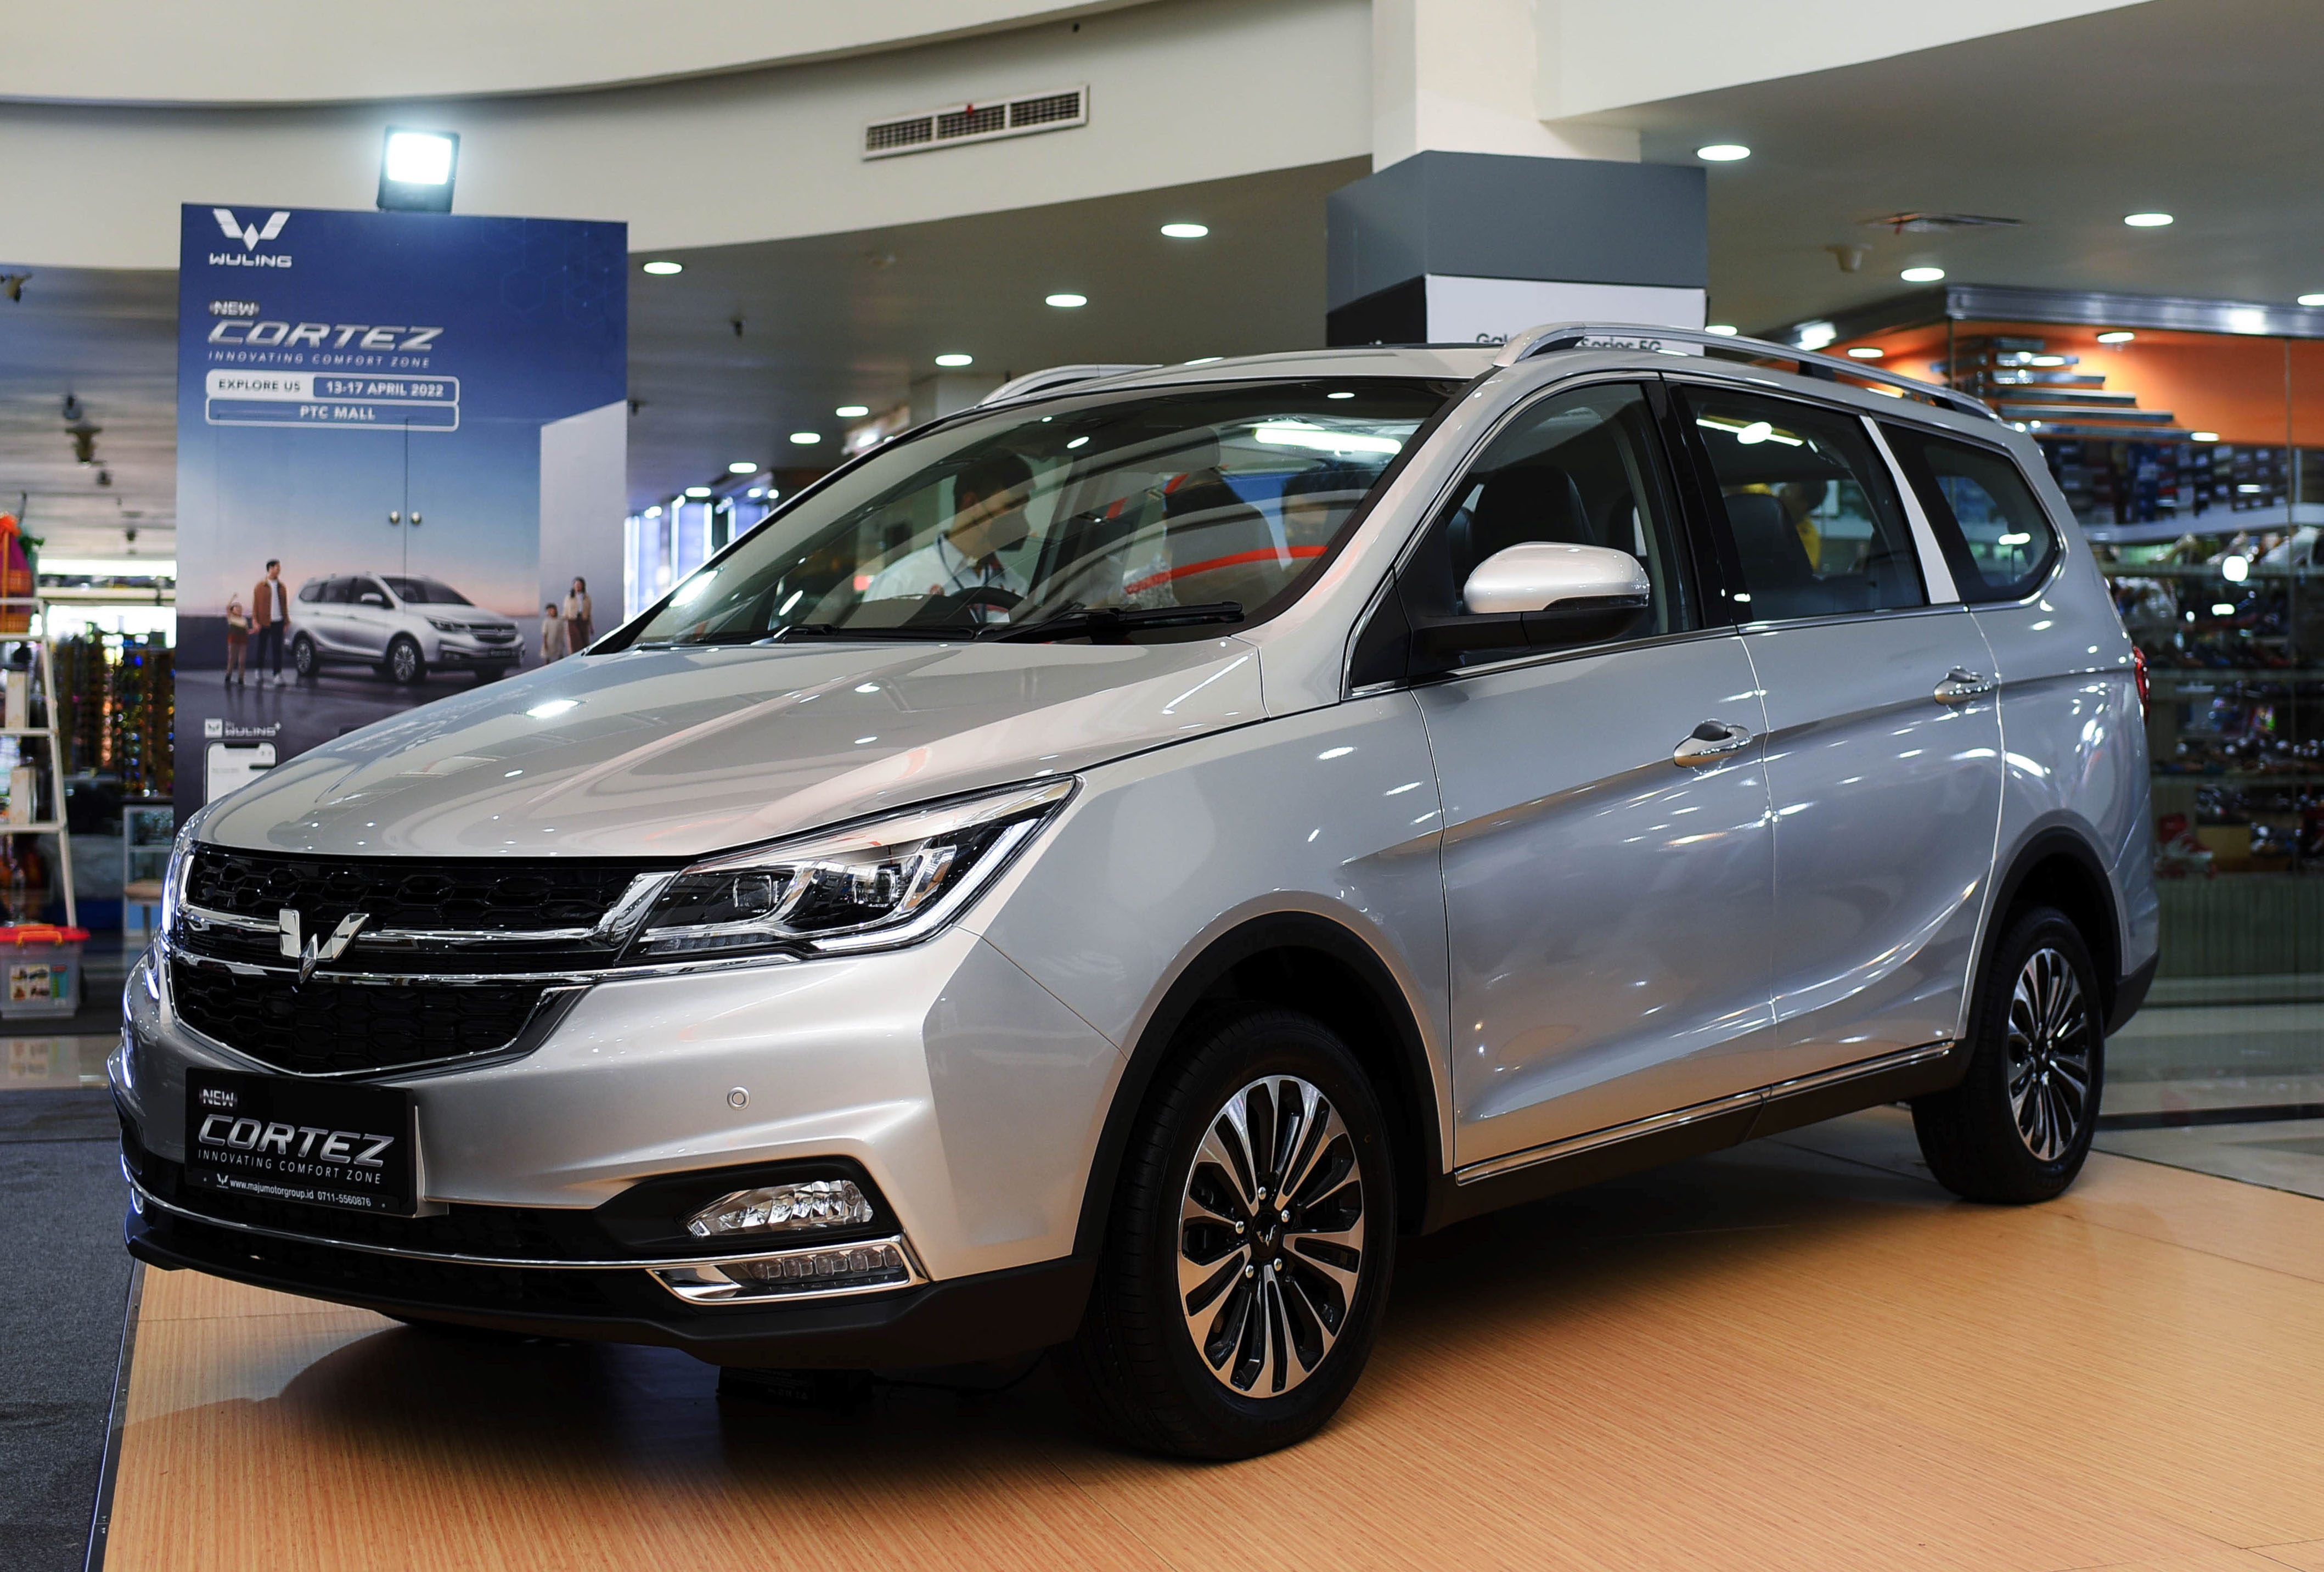 Image Wuling New Cortez, Innovating Comfort Zone, is Introduced in Palembang